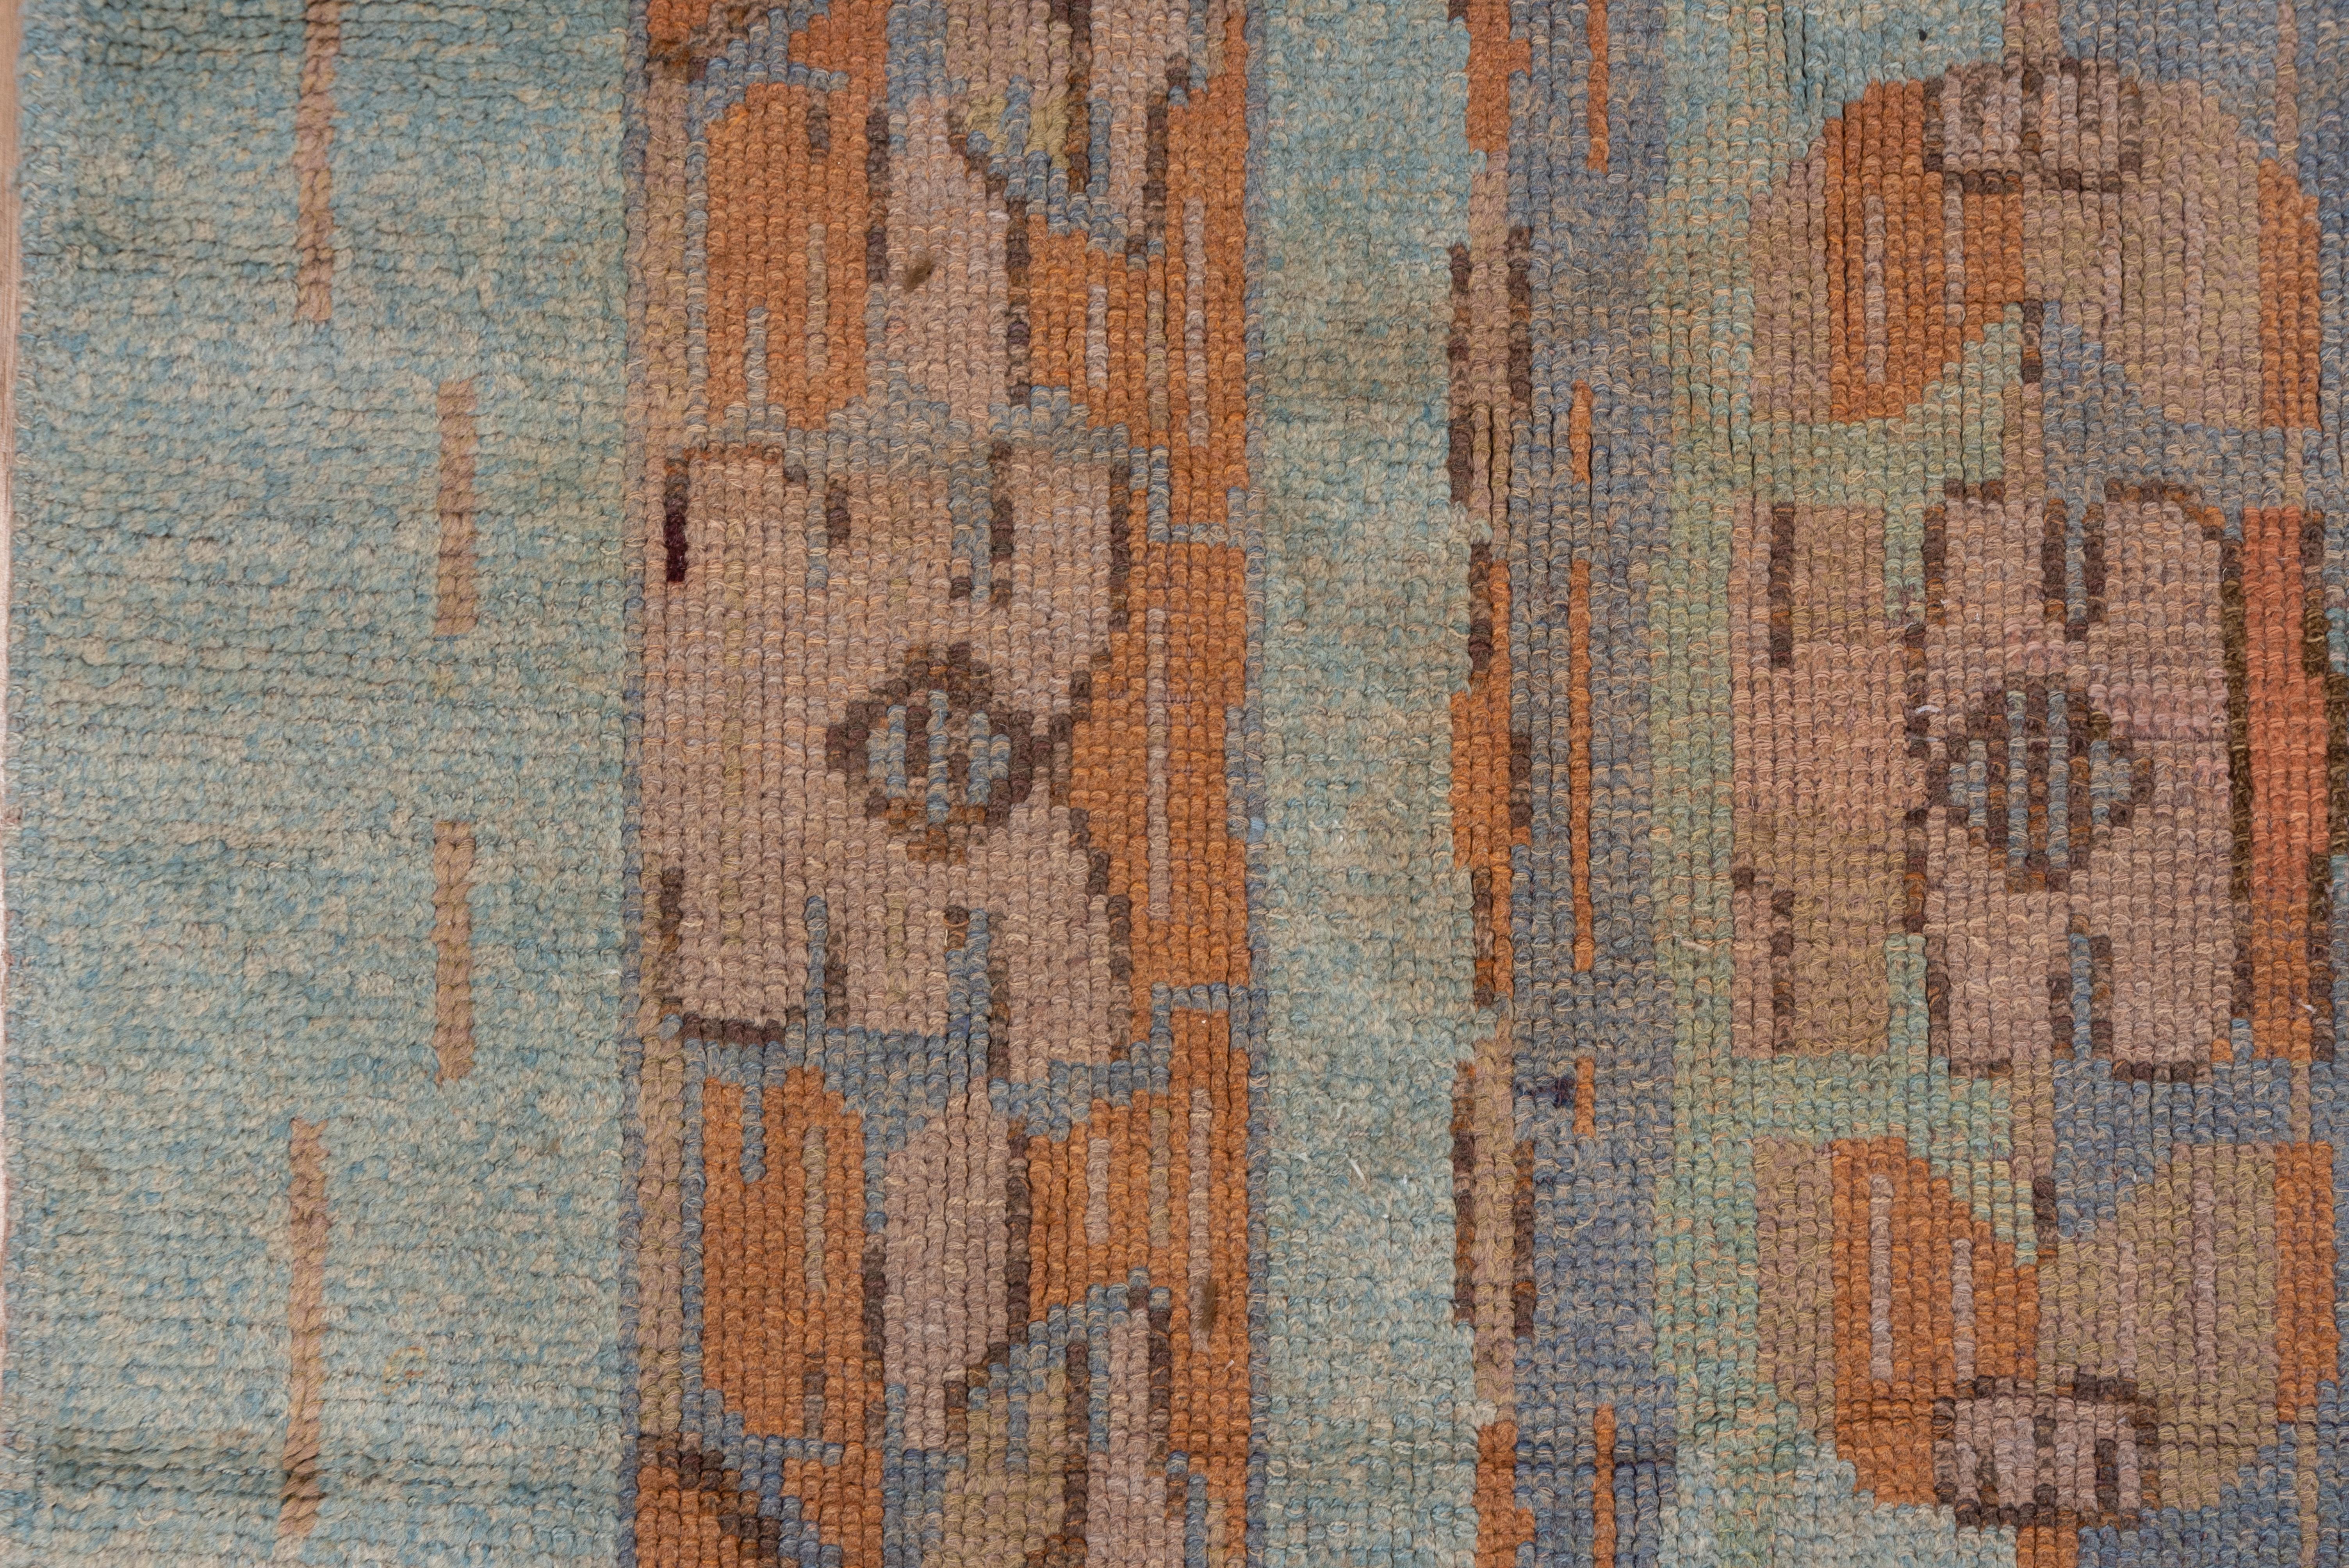 An Art Deco period creation, this northern European carpet shows a broadly divided grey taupe medallion and en suite corners, with a Modernist straight diagonal stem and leaf border. Goldenrod details. Requires a Deco or post decor, Lighter palette.